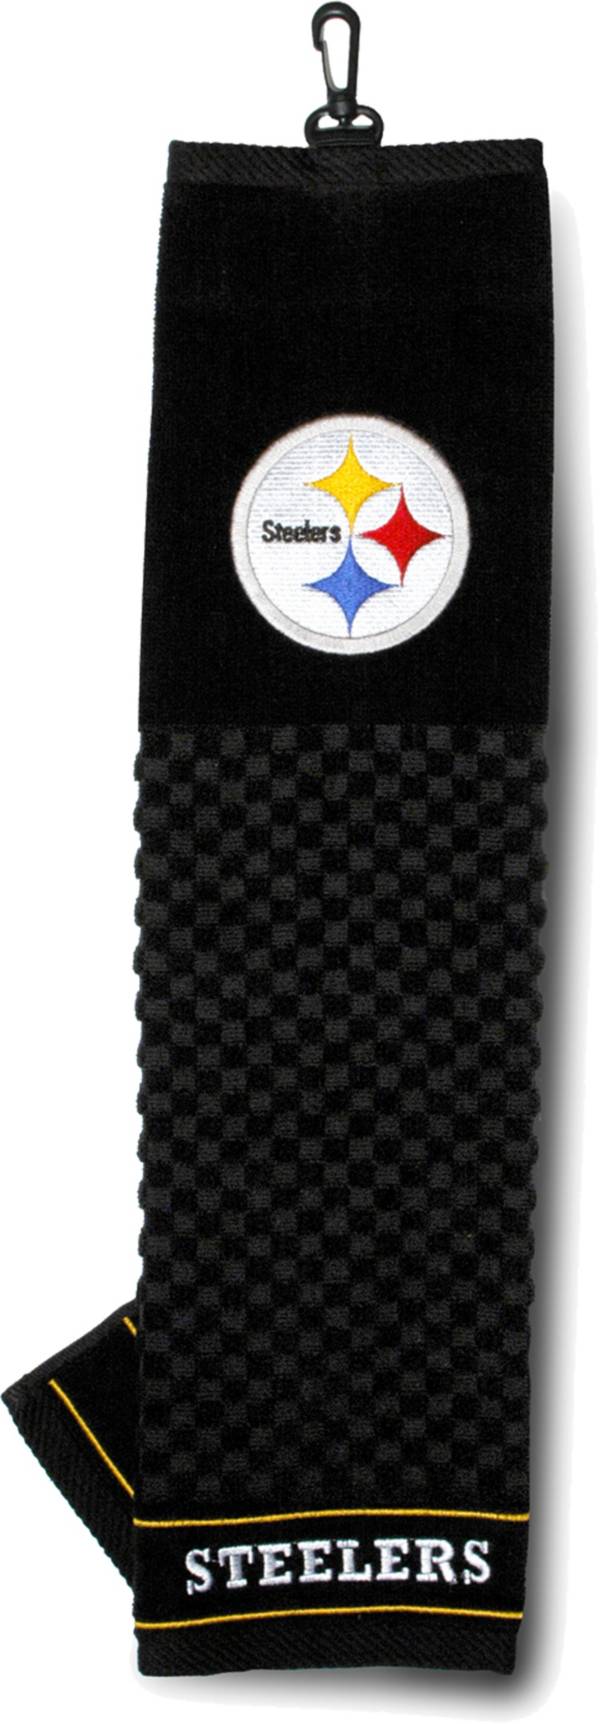 Team Golf Pittsburgh Steelers Embroidered Towel product image